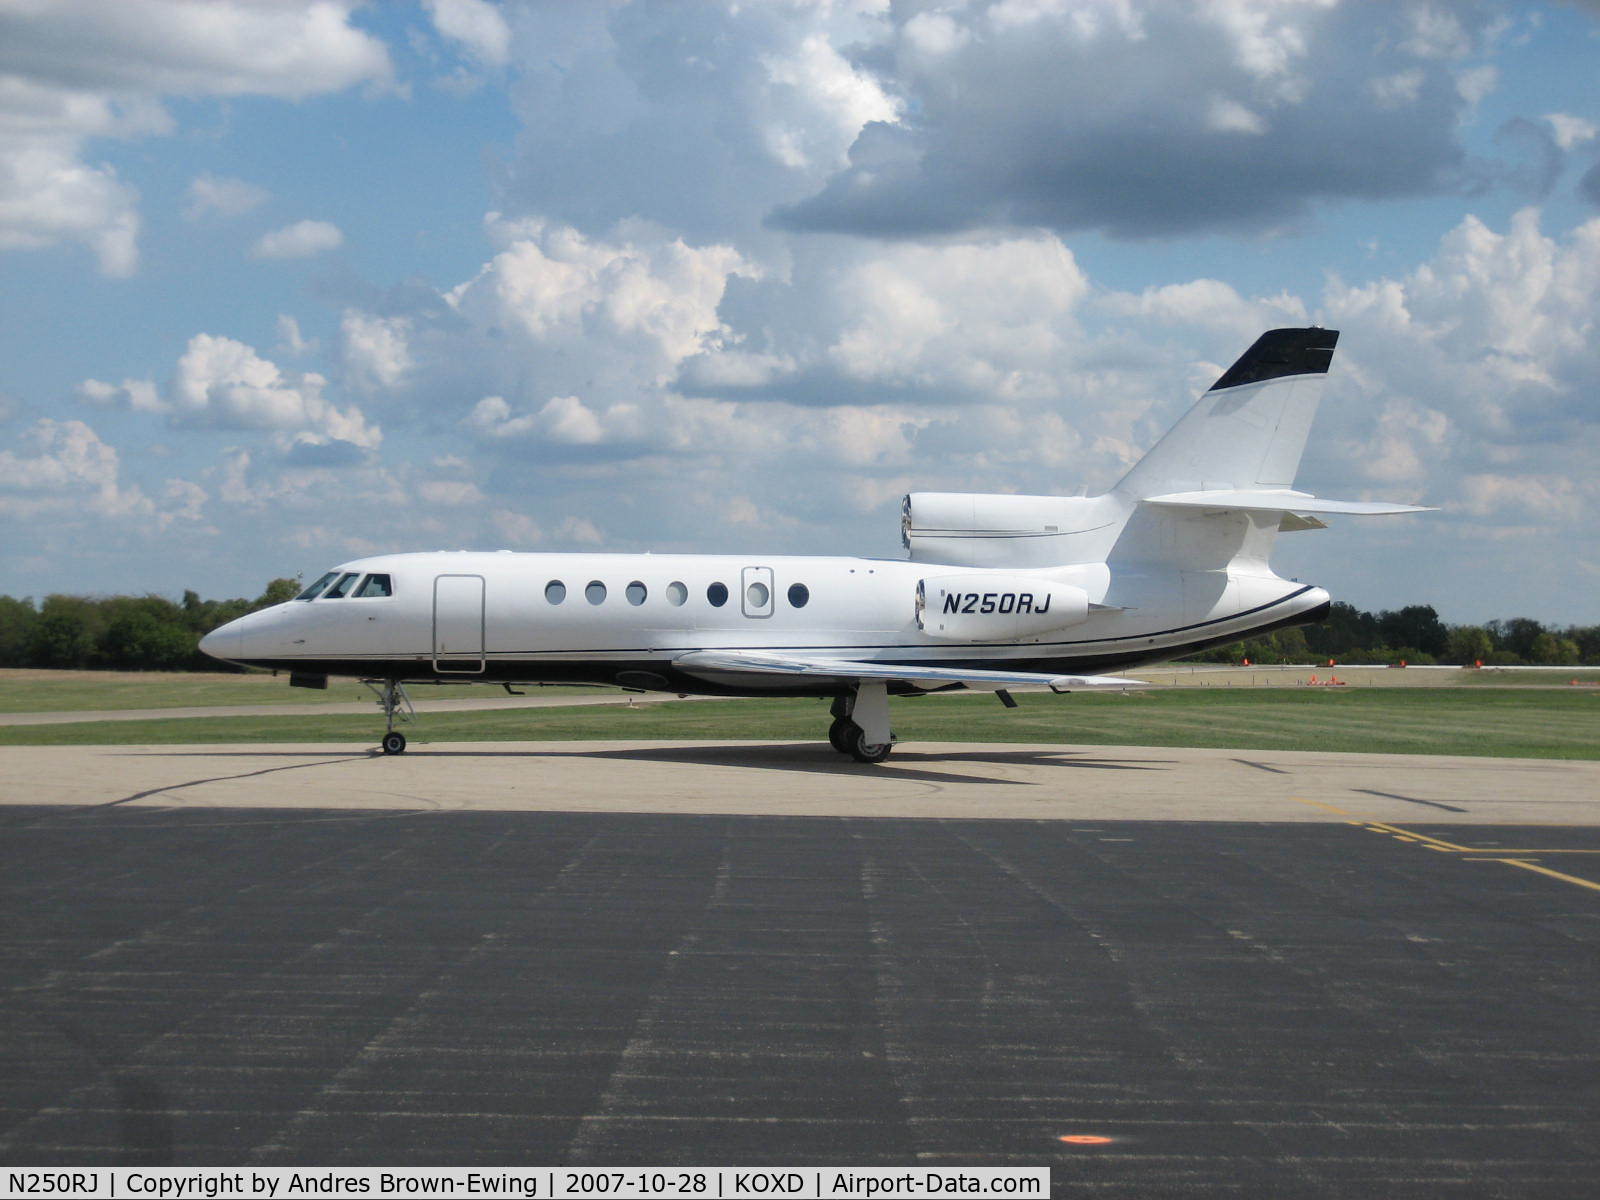 N250RJ, 1981 Dassault Falcon 50 C/N 31, parked for the weekend